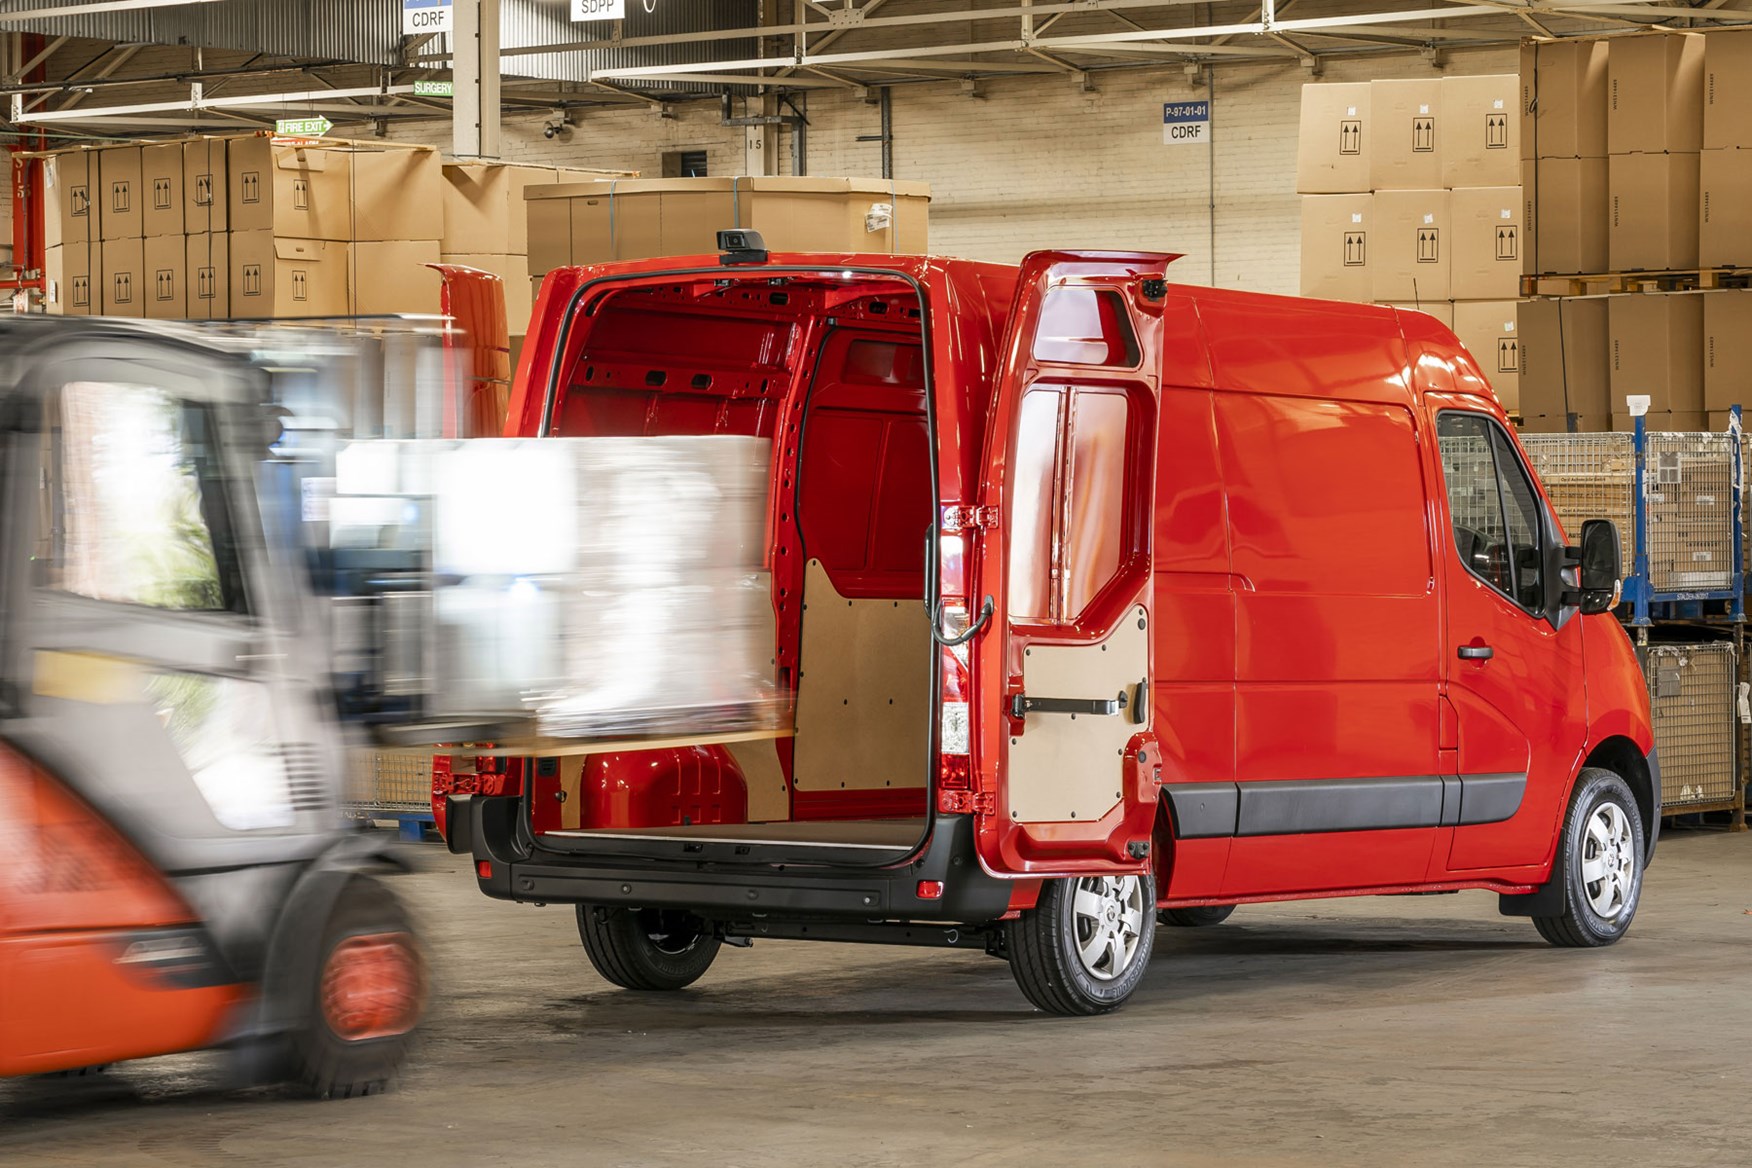 Vauxhall Movano - 2020 model year, being loaded though rear doors by forklift truck, 2019